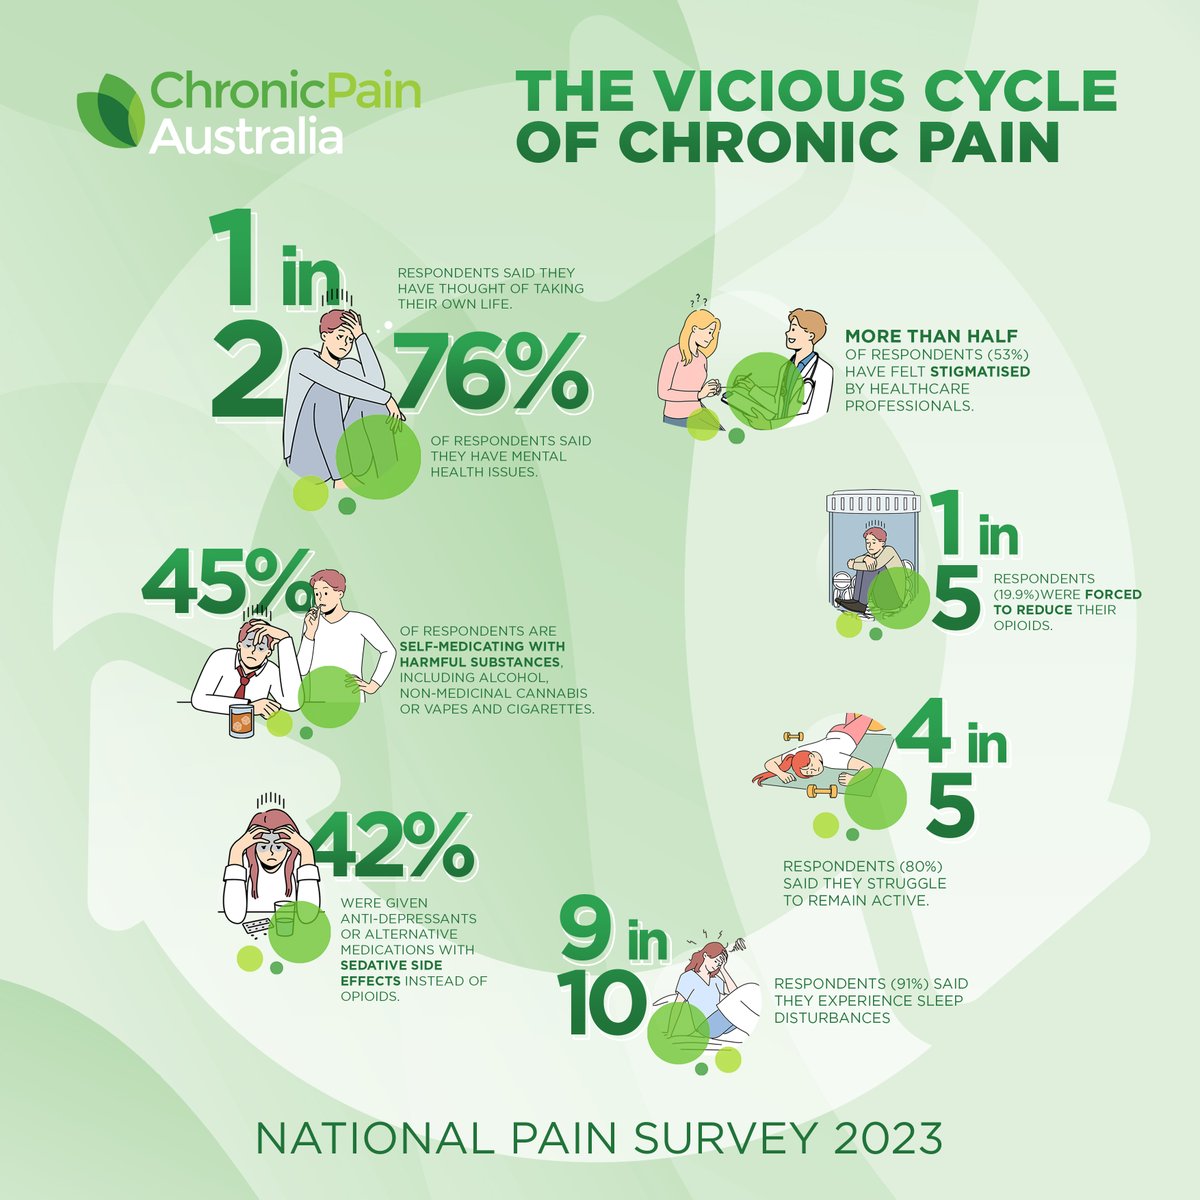 People living with chronic pain are faced with significant barriers and stigma when accessing healthcare, which exacerbates pain and impacts mental health. Help us to break the cycle of chronic pain and join our virtual live events, held from Monday, 24th to Friday, 28th of…